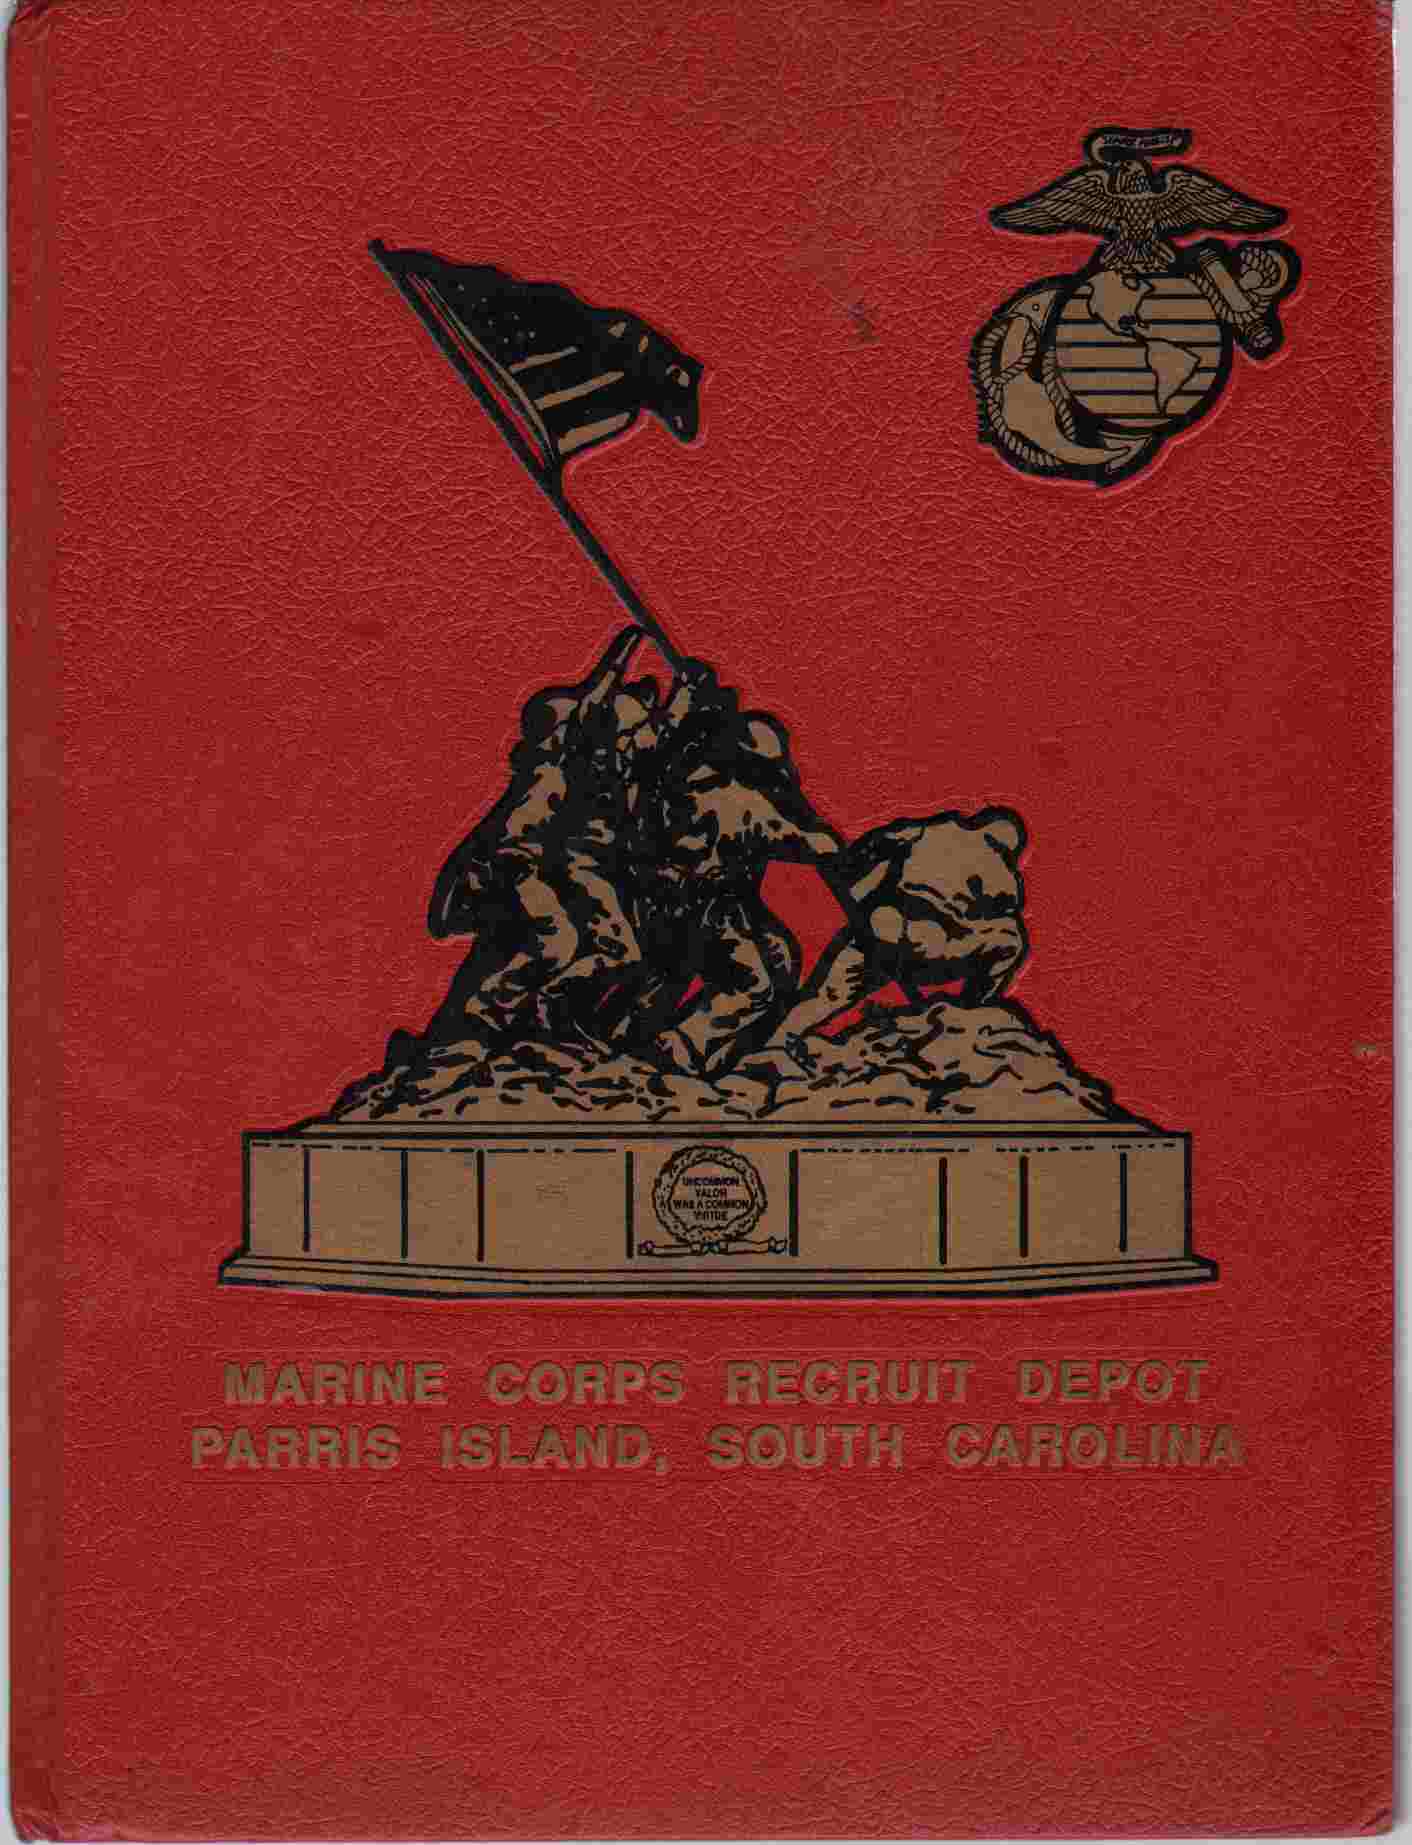 Walsworth - MARINE CORPS RECRUIT DEPOT PARRIS ISLAND SOUTH CAROLINA First Recruit Training Battalion Company B Platoons 1056, 1057 & 1058 May 27, 2003 to August 15, 2003